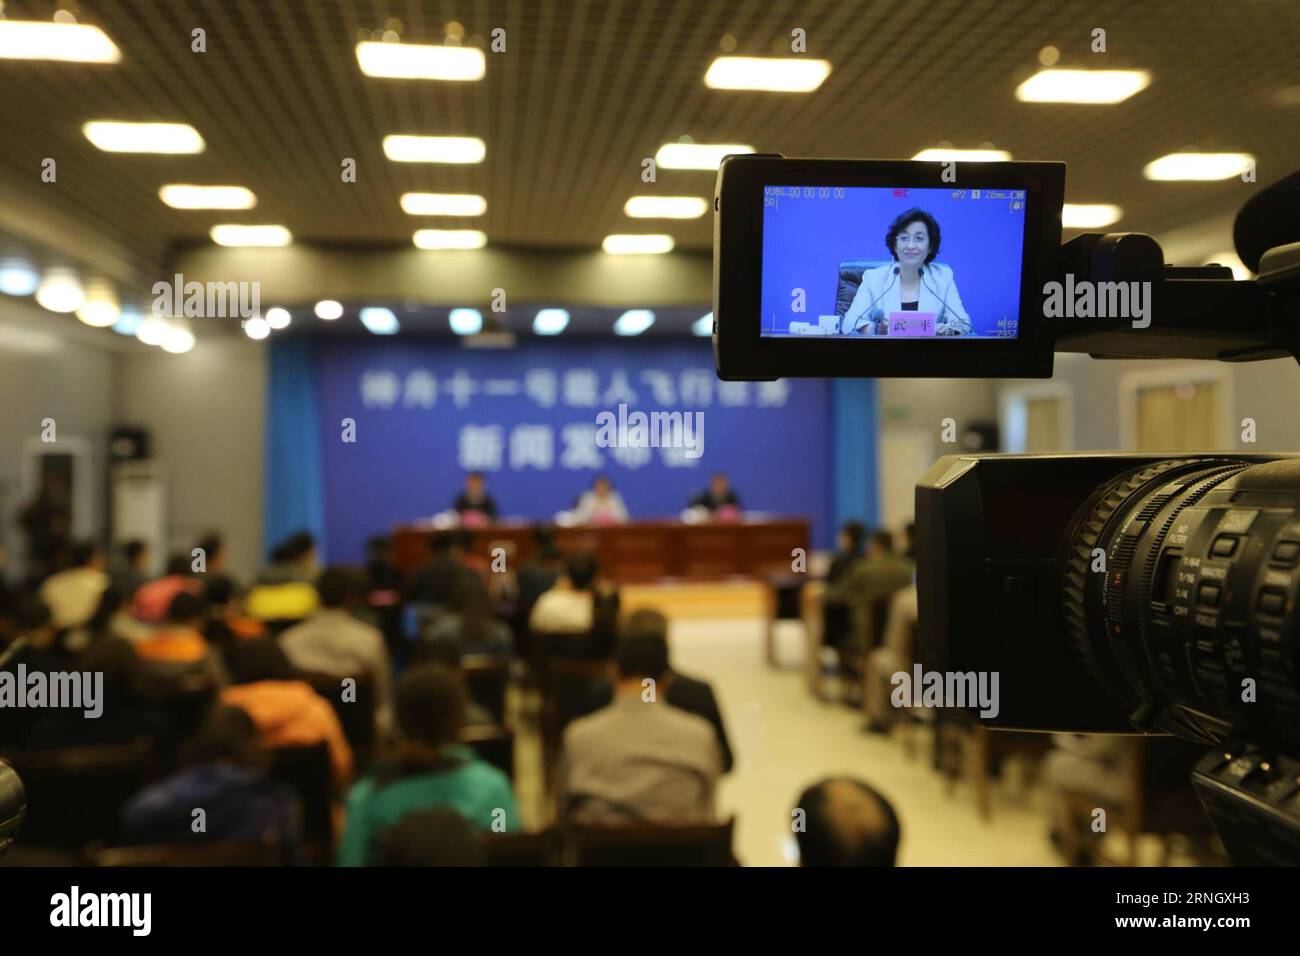 (161016) -- JIUQUAN, Oct. 16, 2016 -- Wu Ping, deputy director of China s manned space engineering office, addresses a press conference at the Jiuquan Satellite Launch Center in northwest China, Oct. 16, 2016. The Shenzhou-11 manned spacecraft will be launched at 7:30 a.m. Oct. 17, 2016 Beijing Time (2330 GMT Oct. 16). The spaceship will take two male astronauts Jing Haipeng and Chen Dong into space. The spacecraft will dock with orbiting space lab Tiangong-2 within two days and the astronauts will stay in the space lab for 30 days before returning to Earth. The 50-year-old Jing will be comman Stock Photo